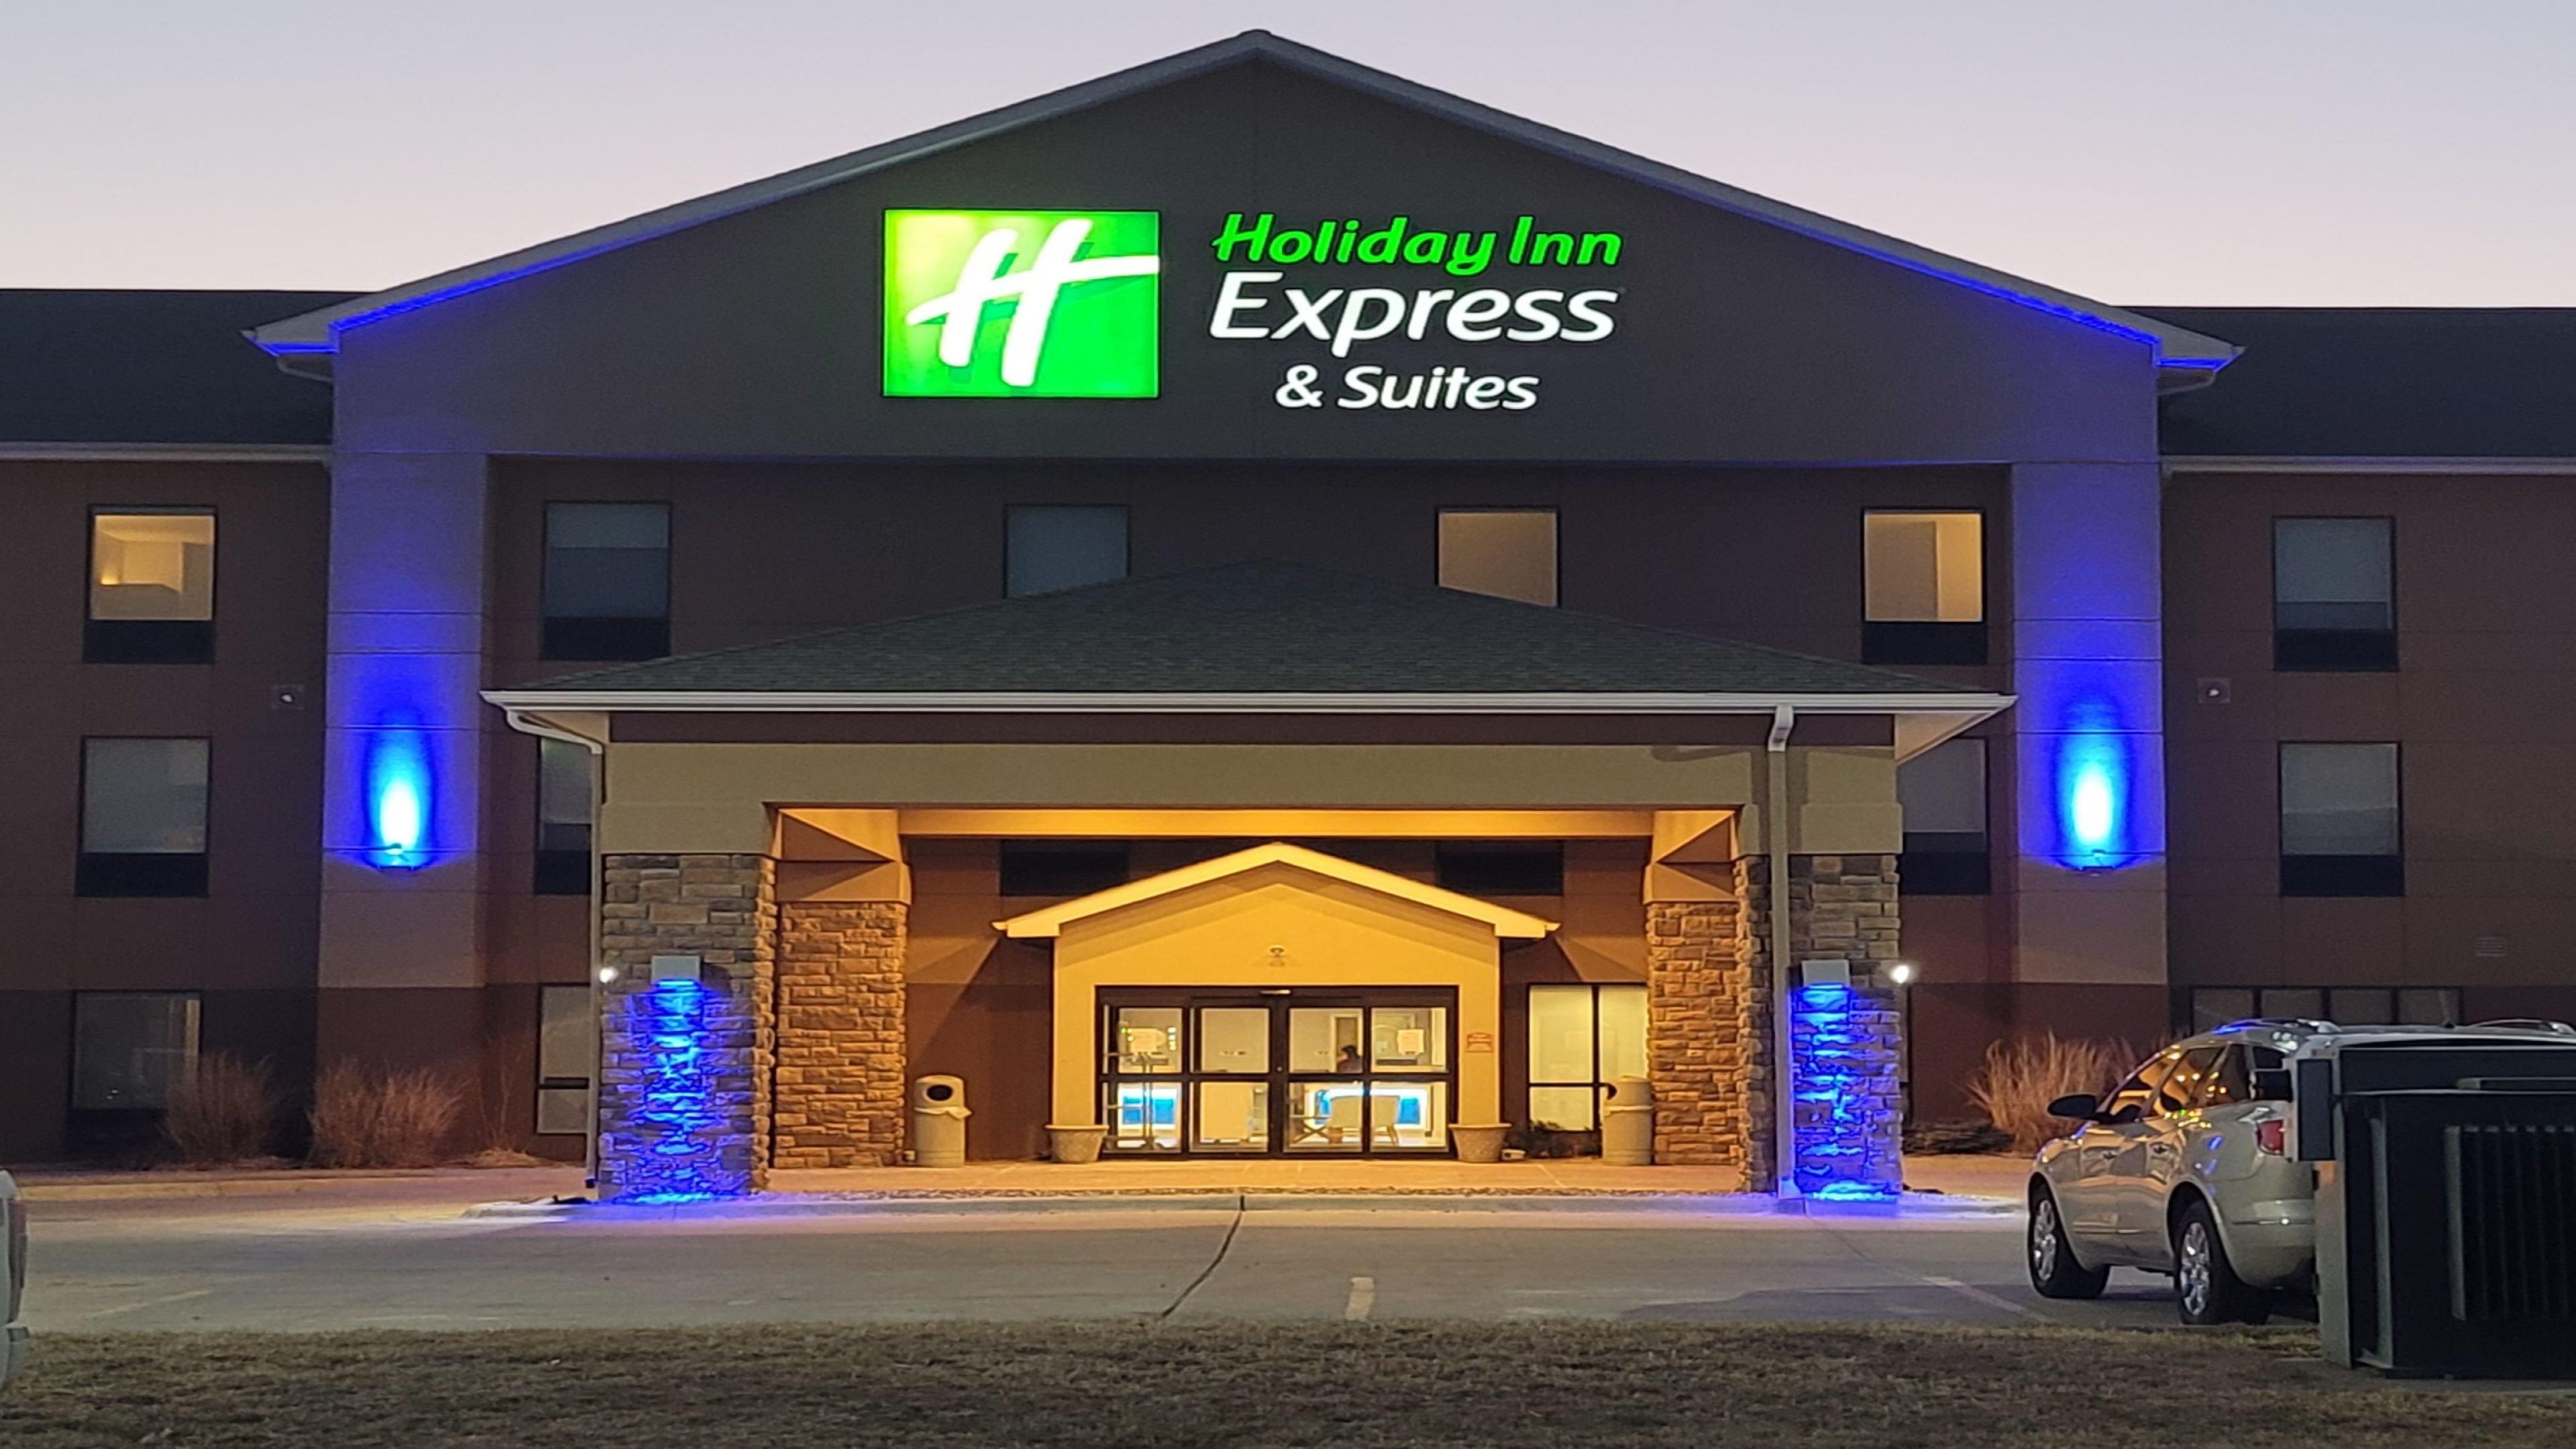 Holiday Inn Express and Suites - Junction City, Kansas image